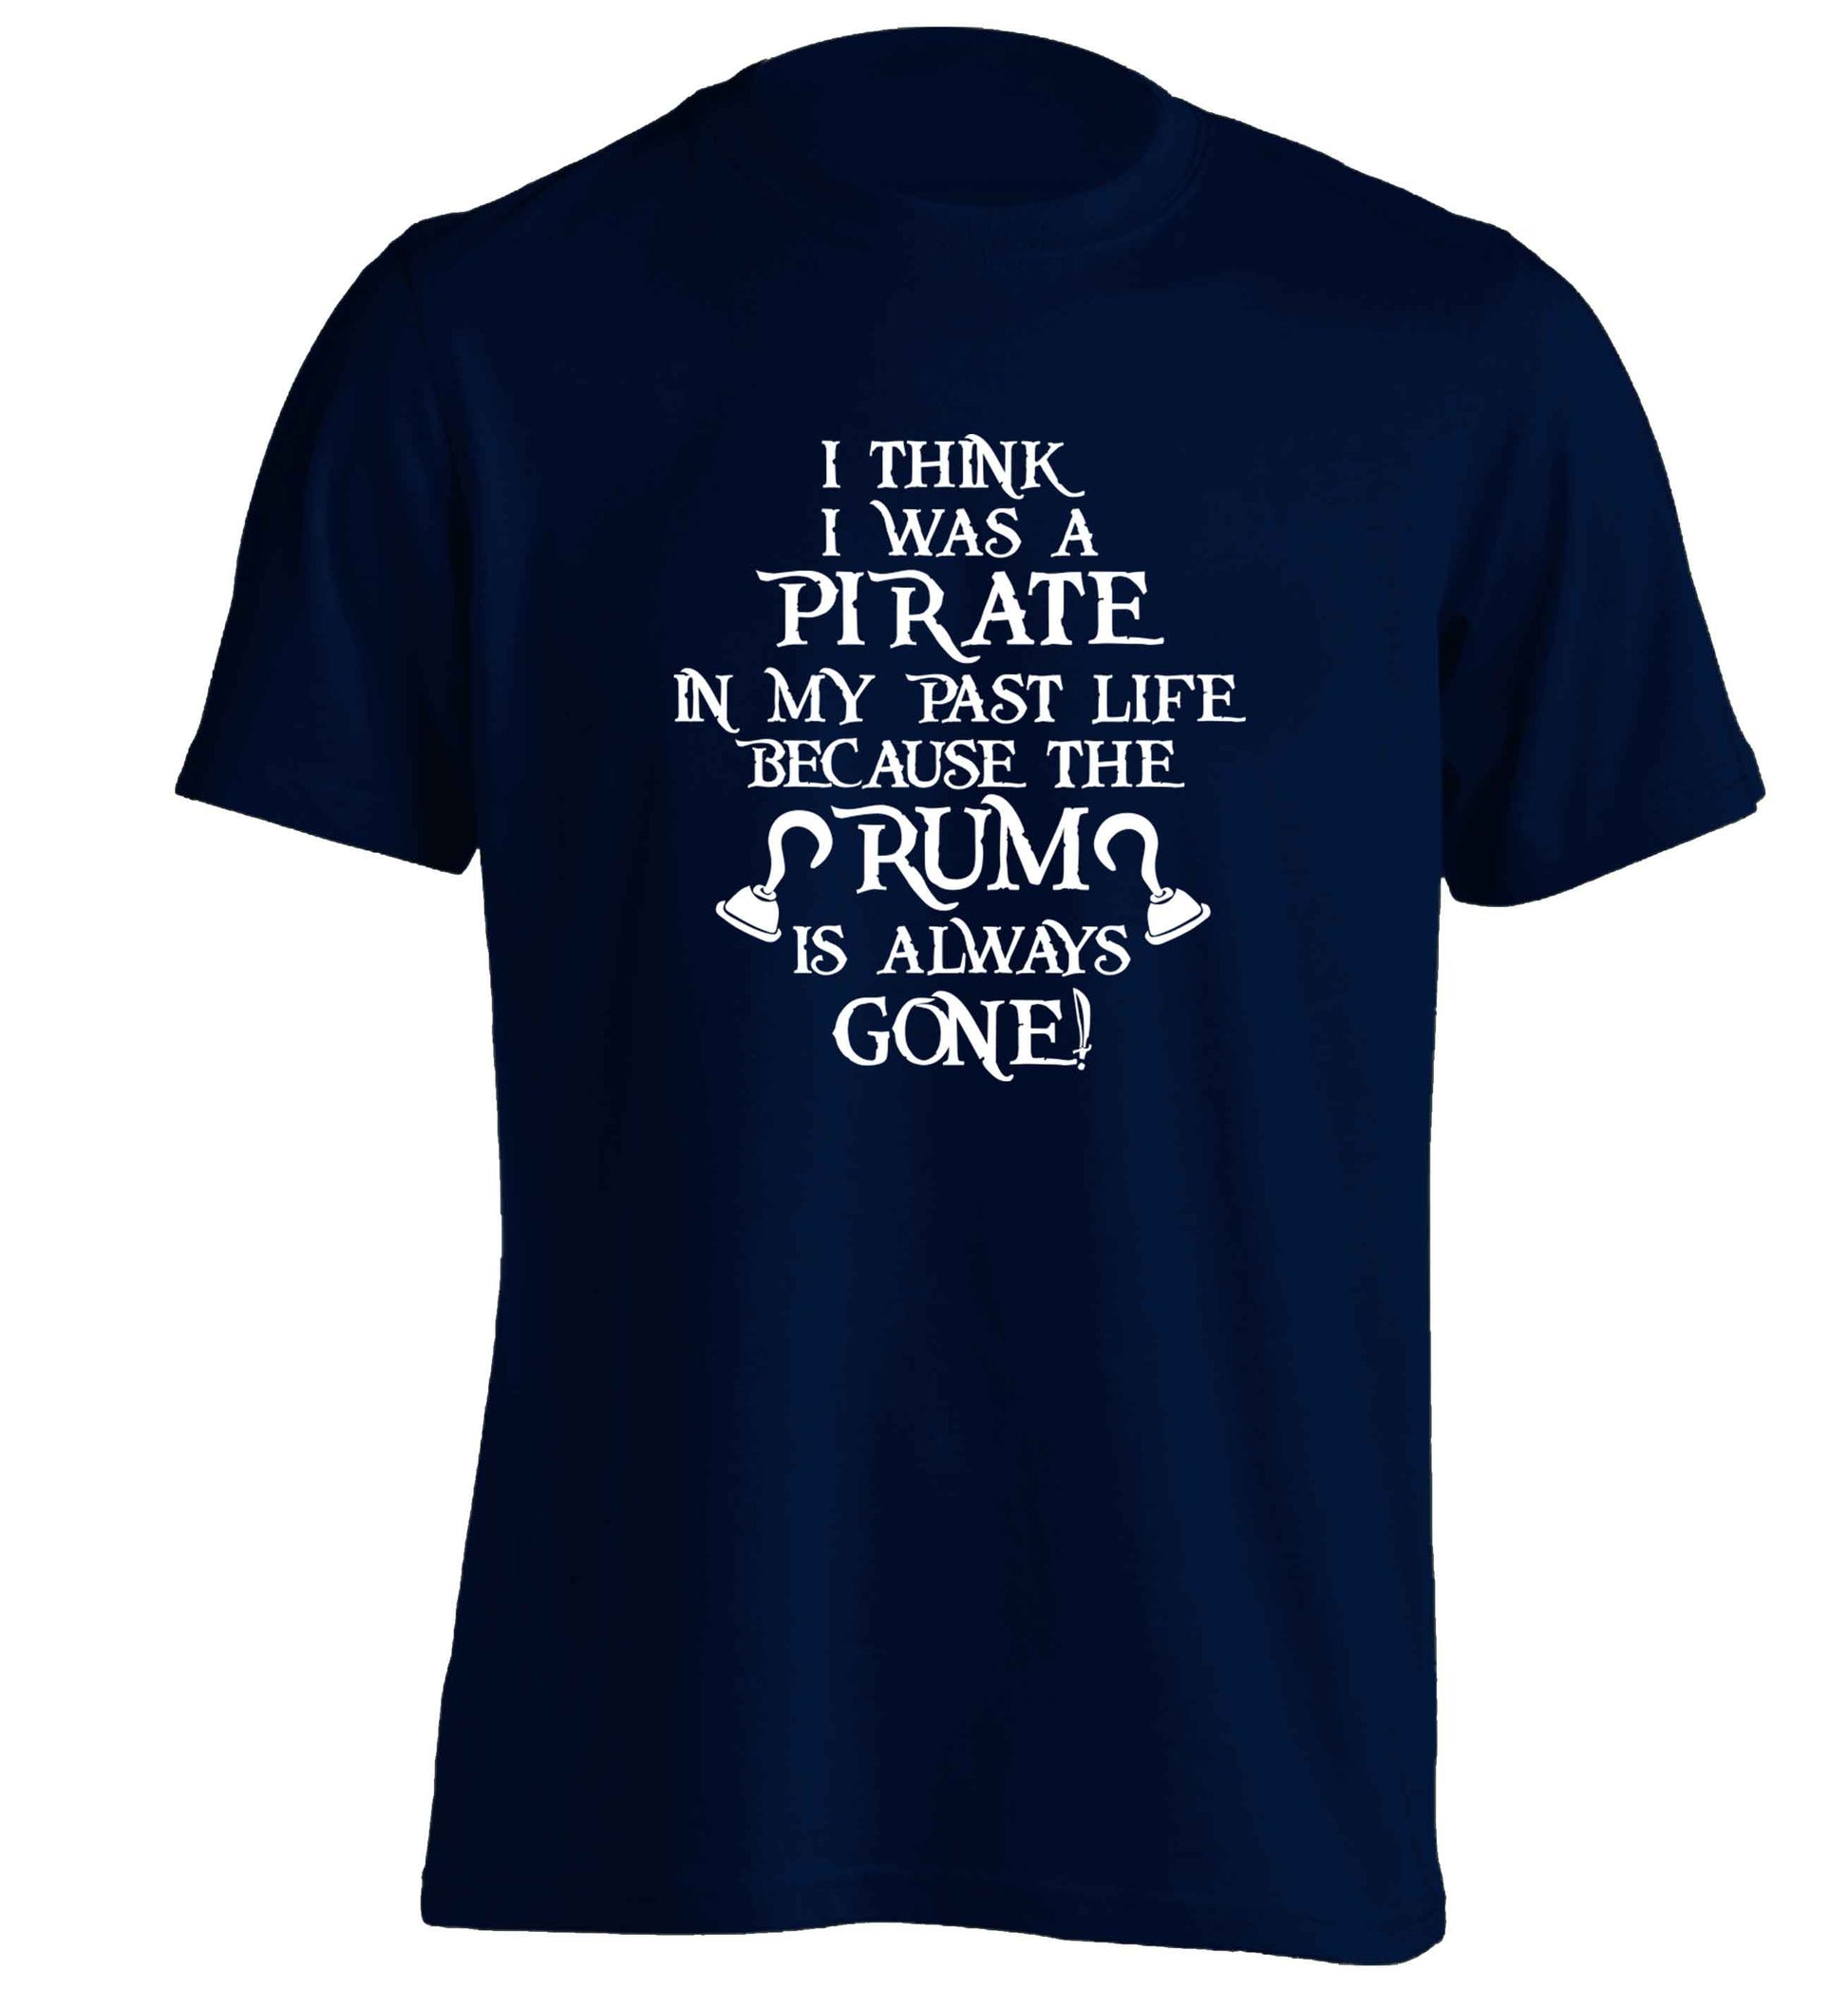 I think I was a pirate in my past life the rum is always gone adults unisex navy Tshirt 2XL